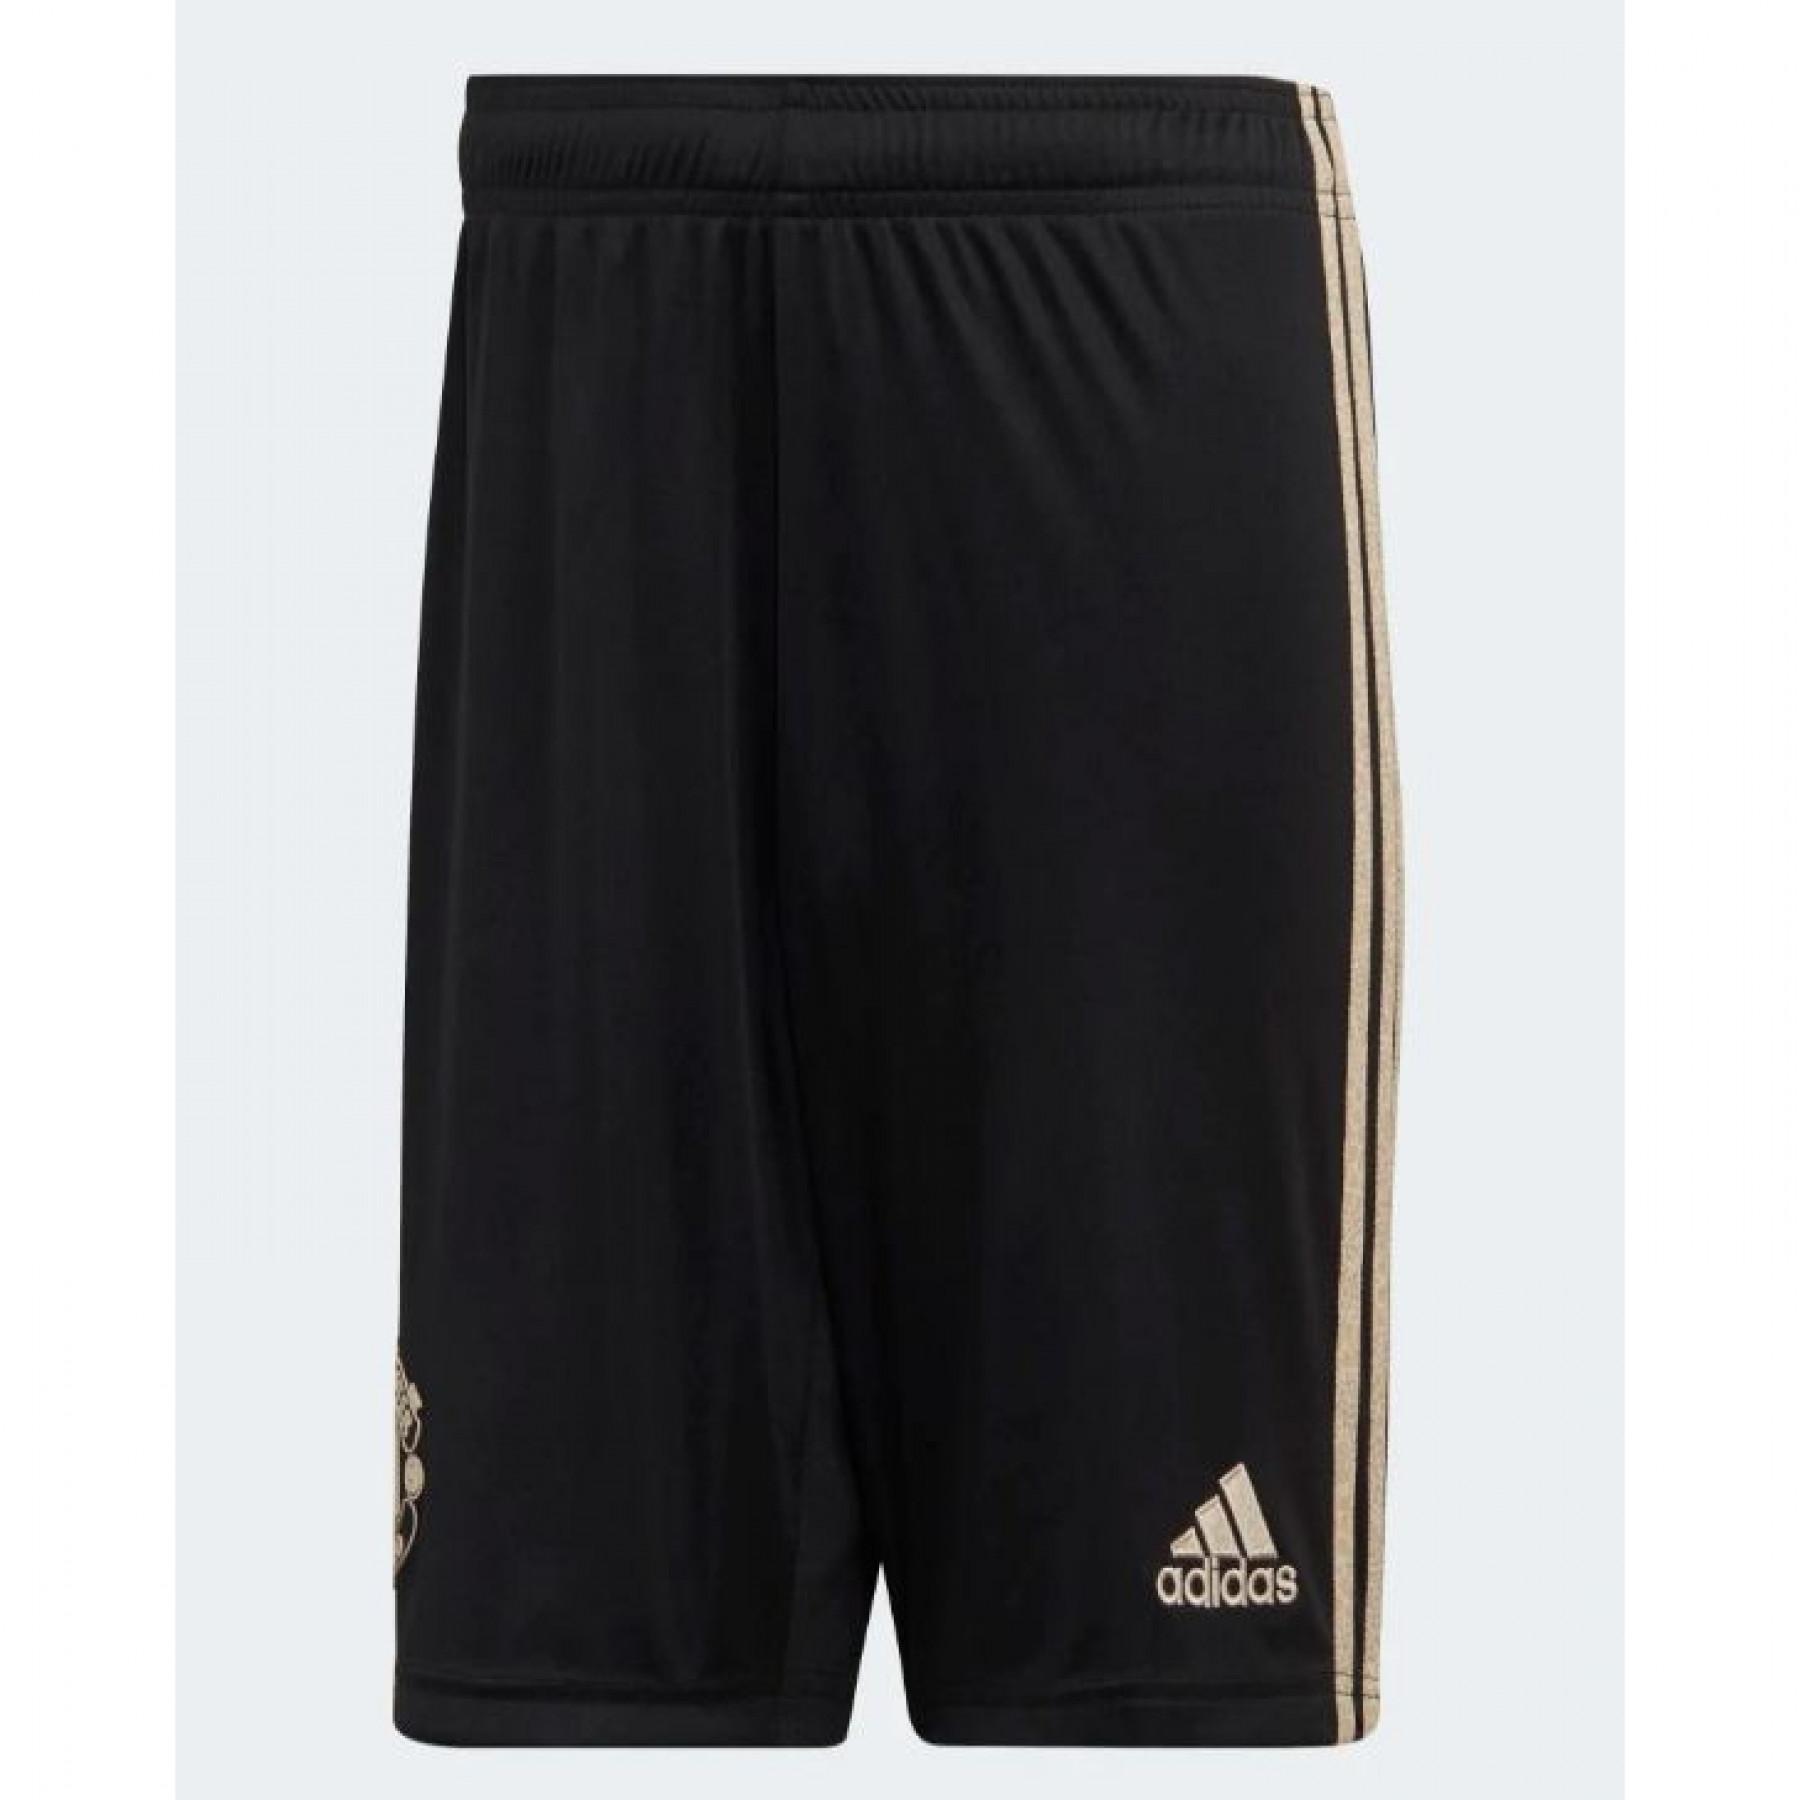 Outdoor shorts Manchester United 2019/20